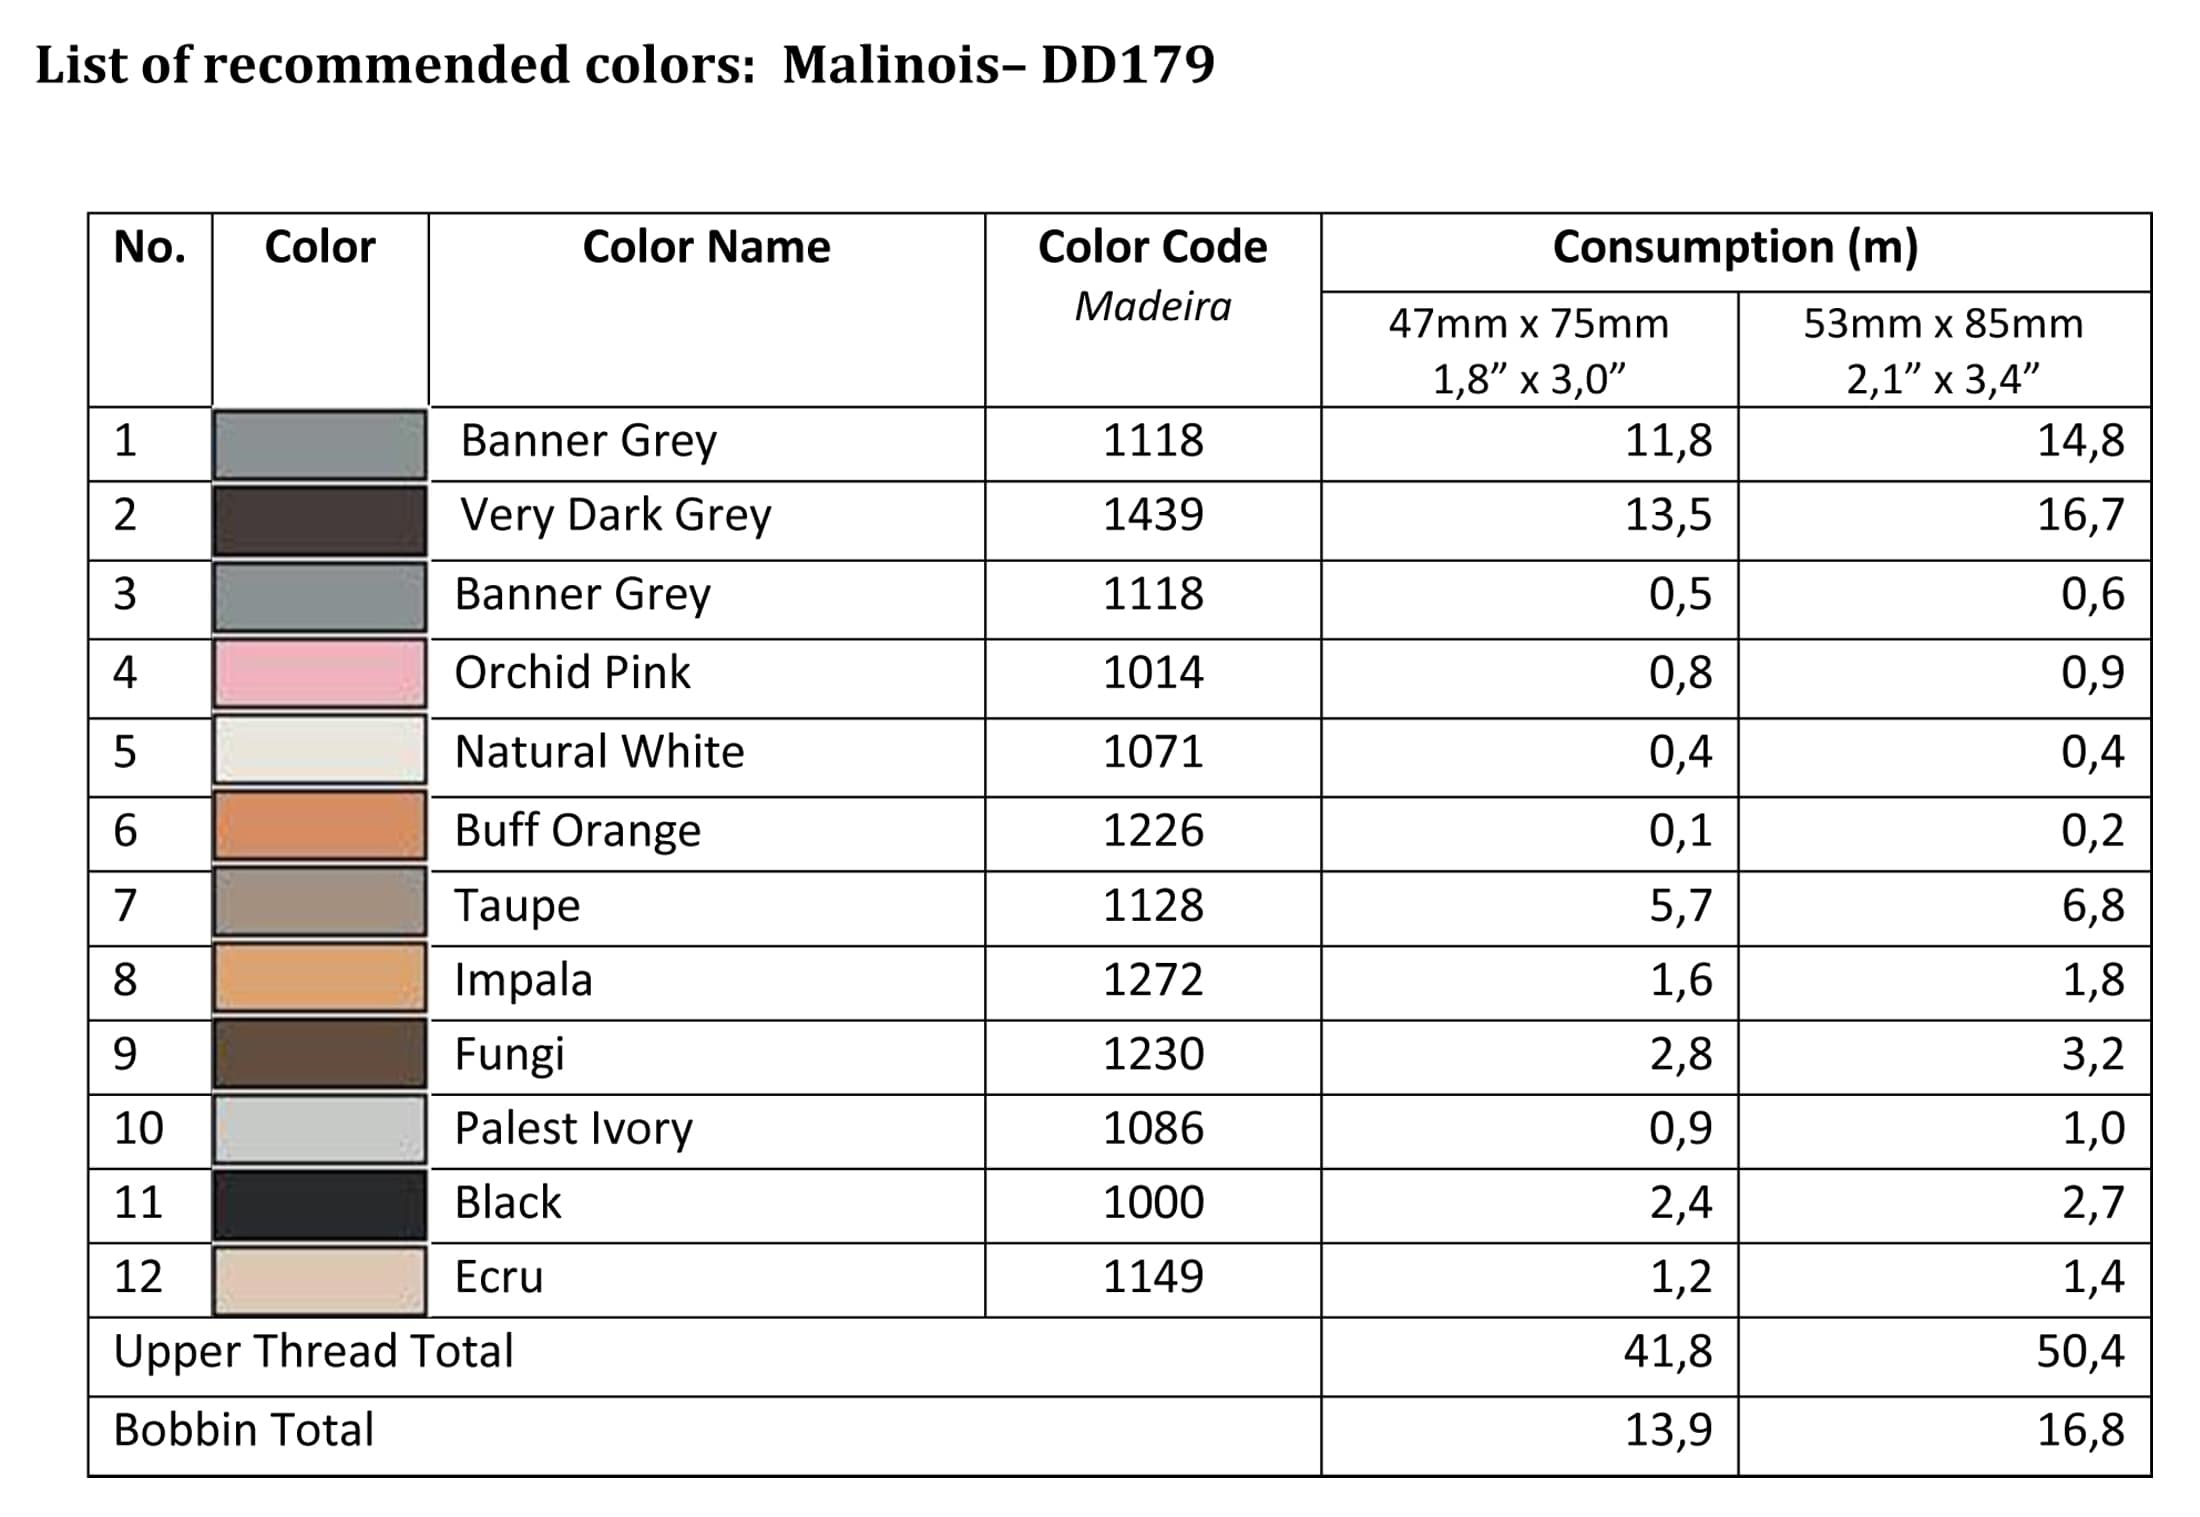 List of recommended colors - DD179